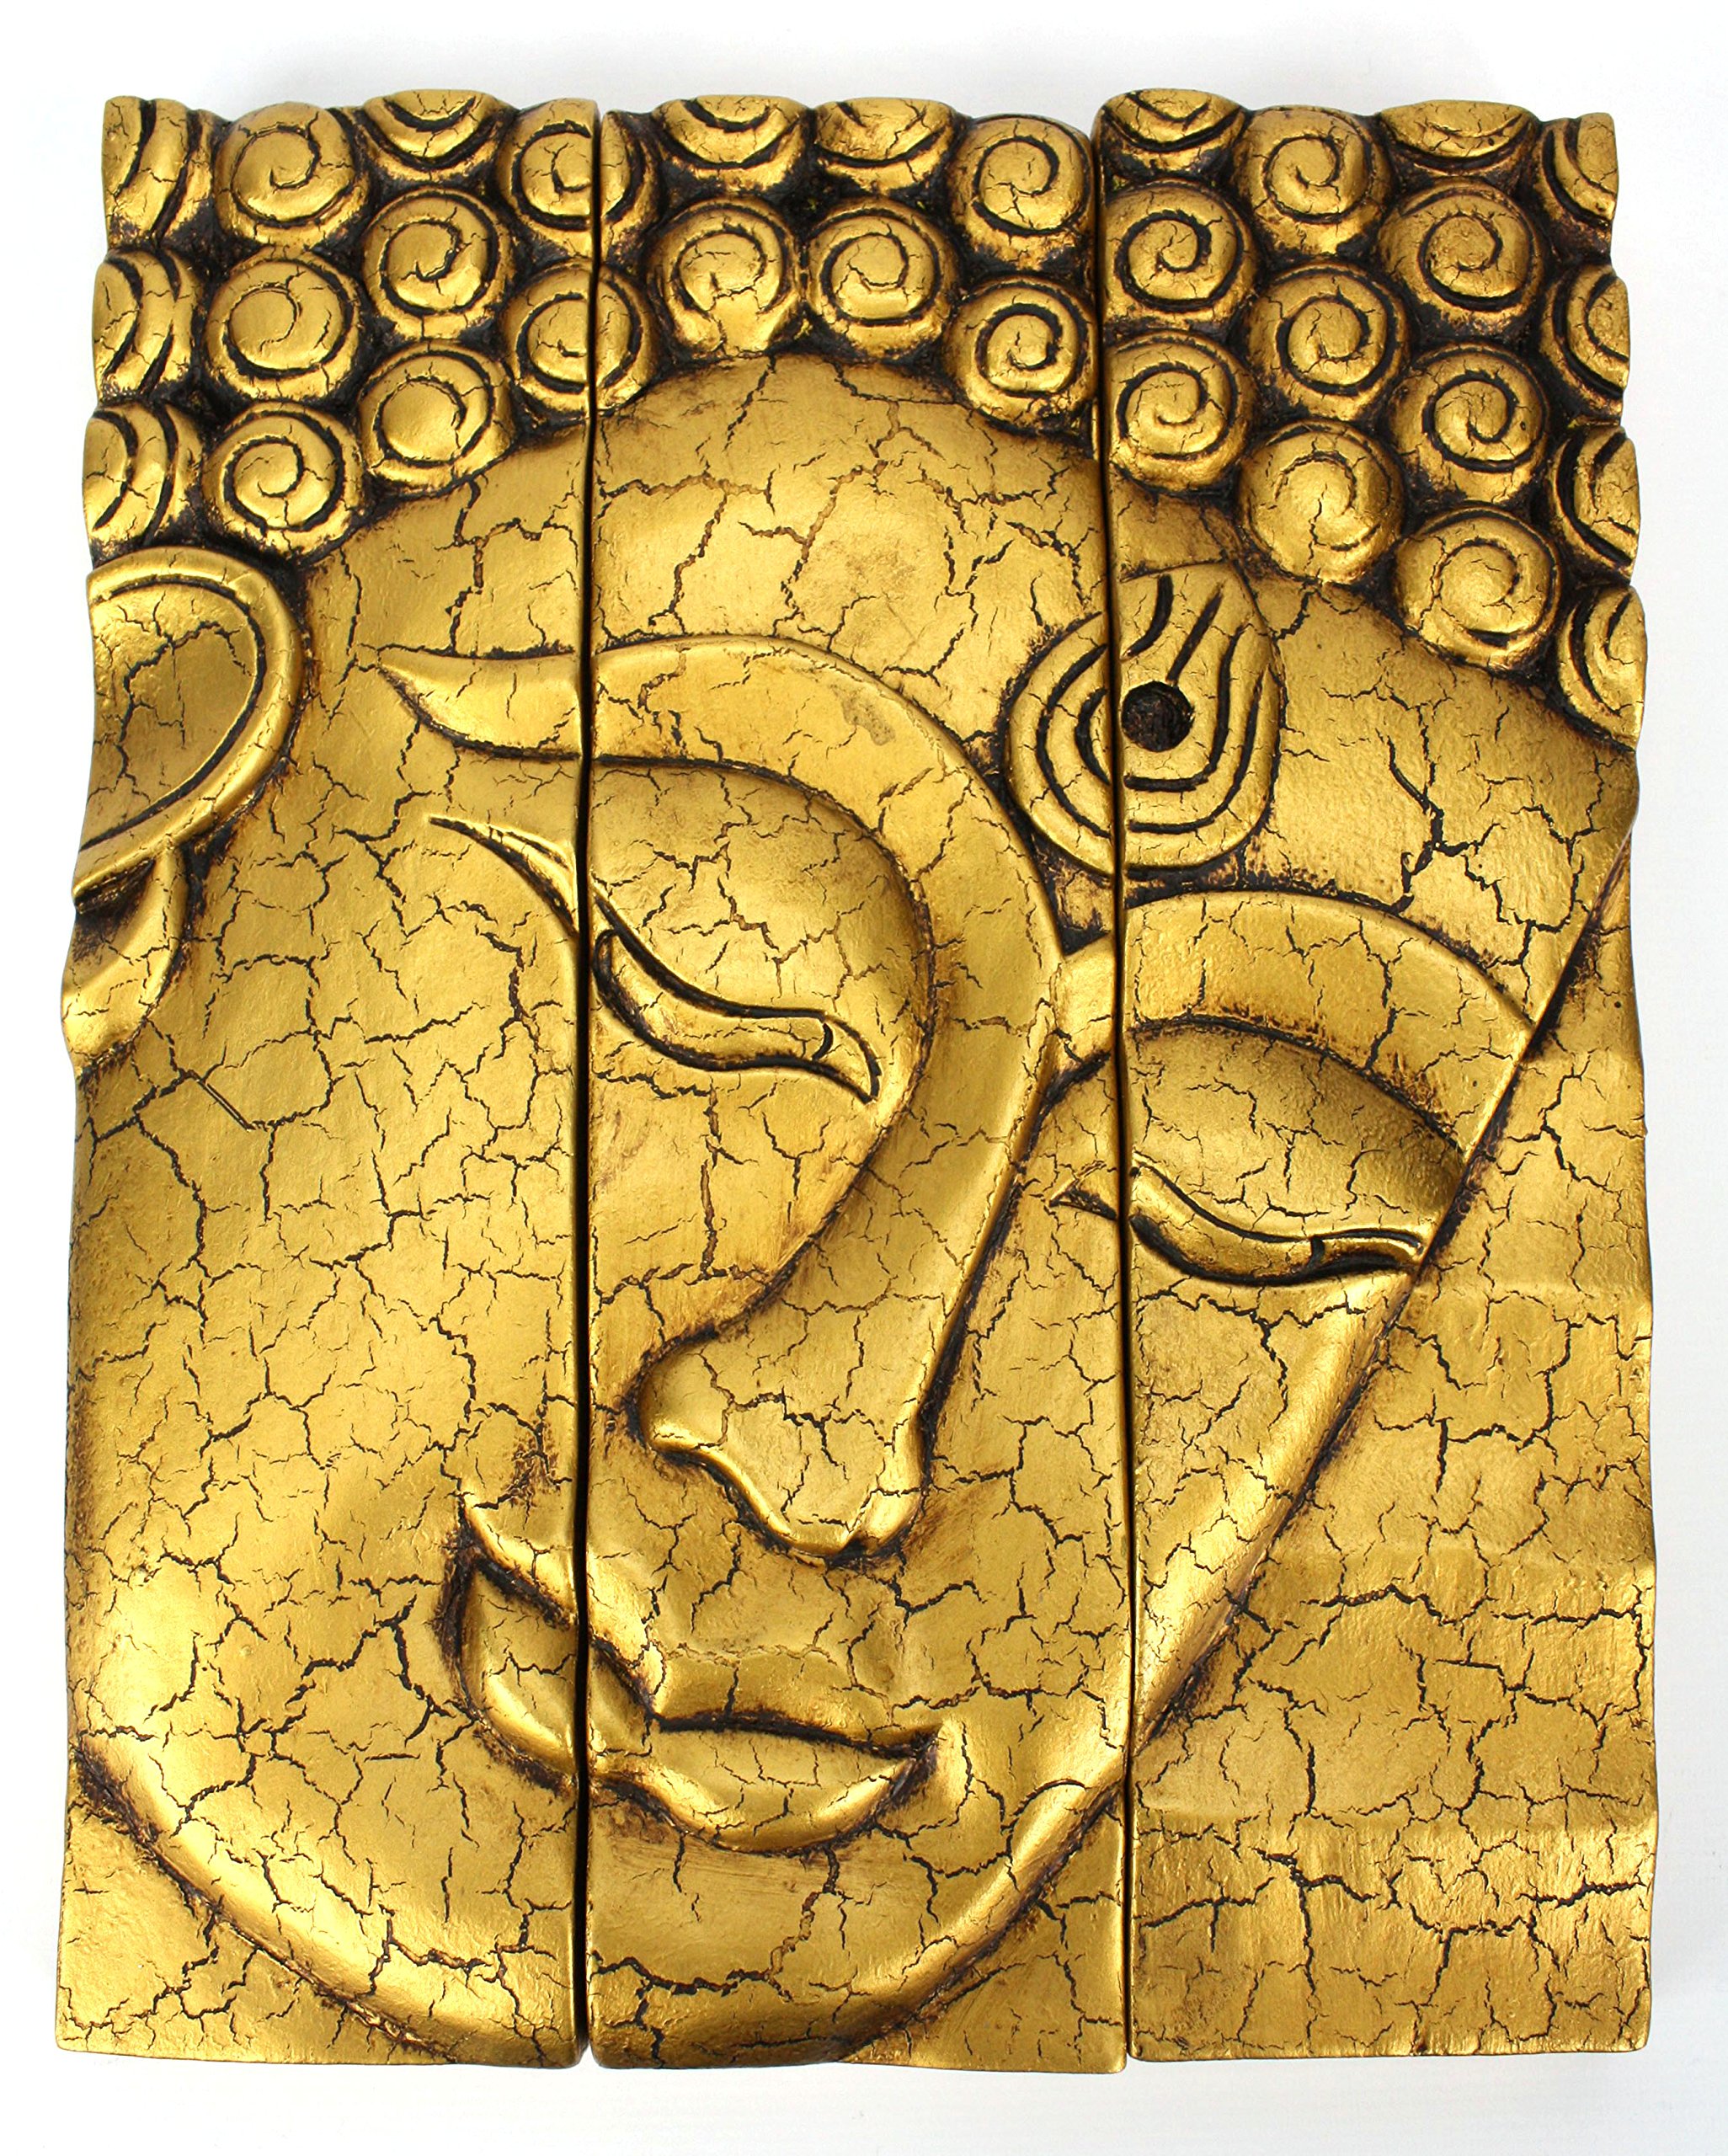 3-part Thai Buddha face panel - cracked Gold finish, carved wood ...